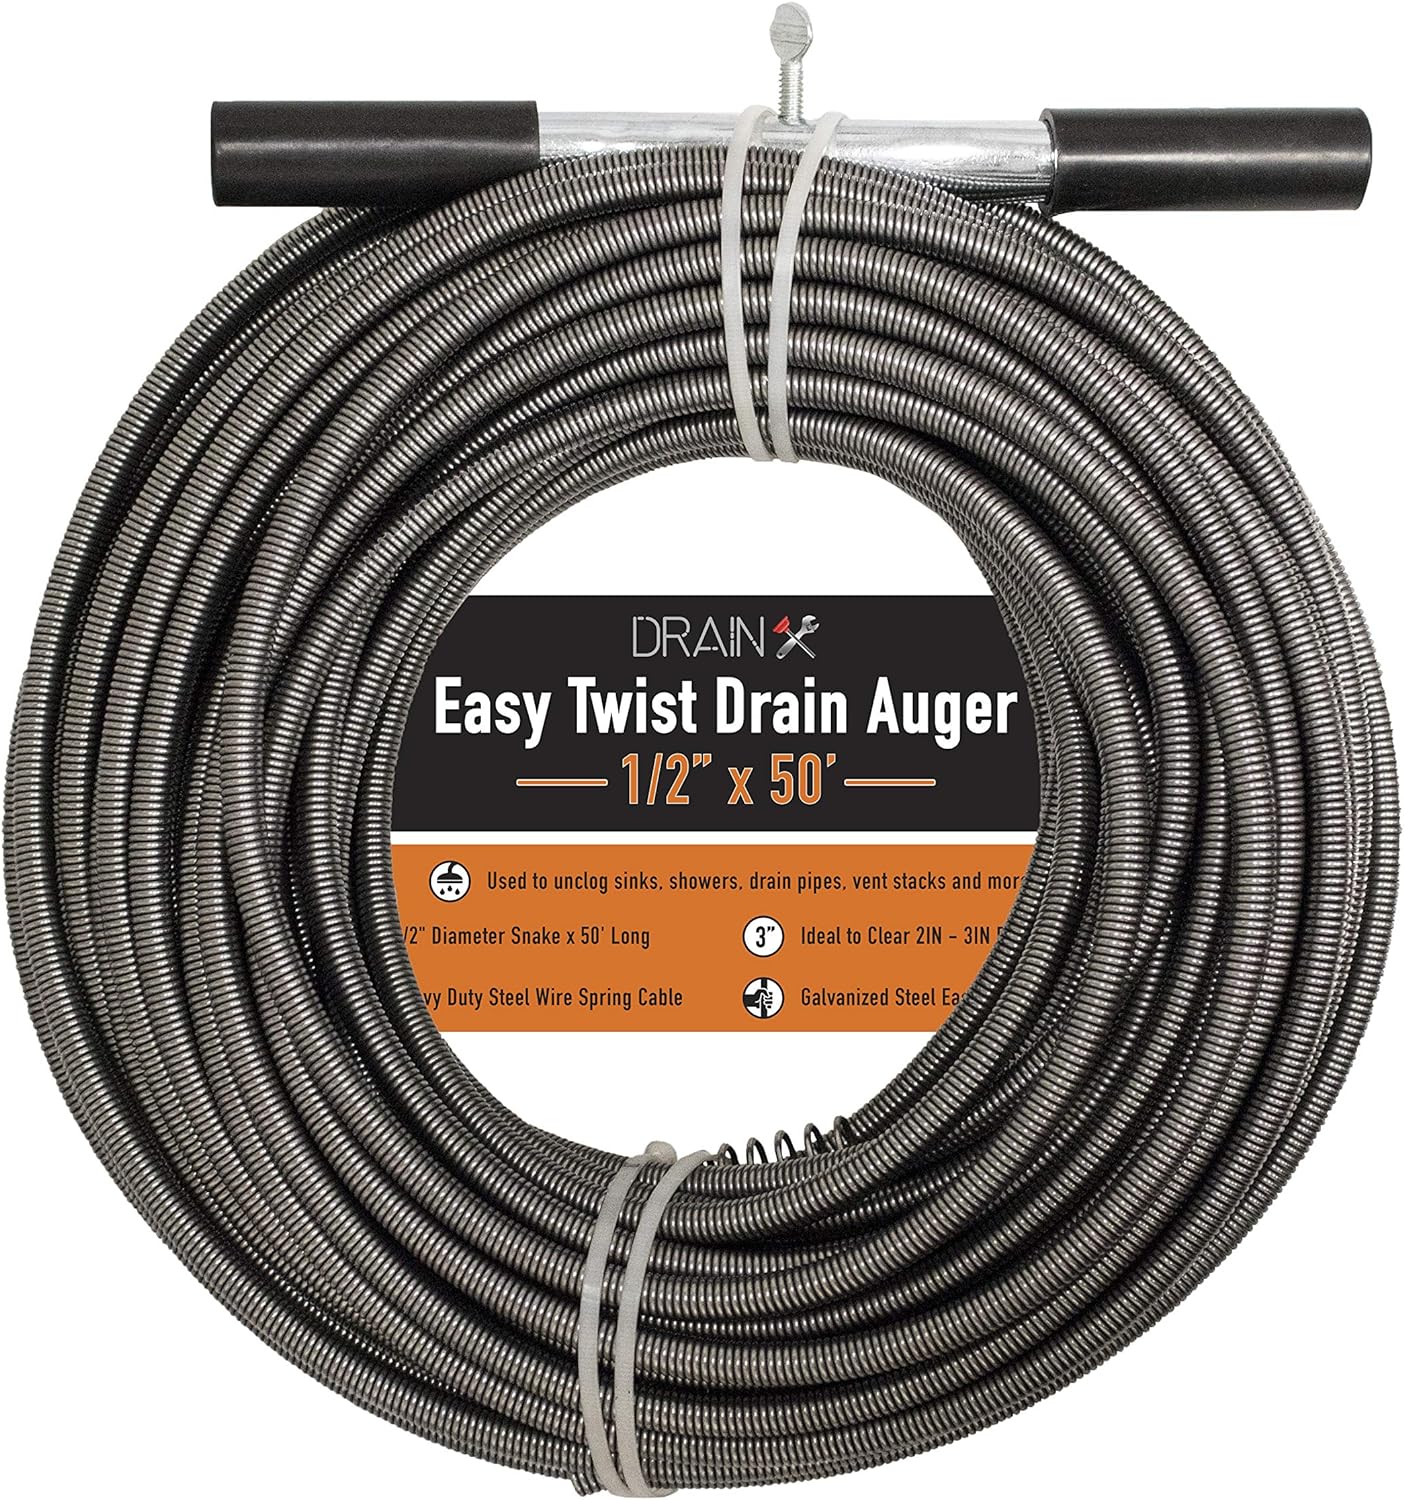 Drainx Easy Twist Drain Auger | Flexible Plumbing Cables for Cleaning Drainage Clogs Includes Storage Bag and Protective Gloves